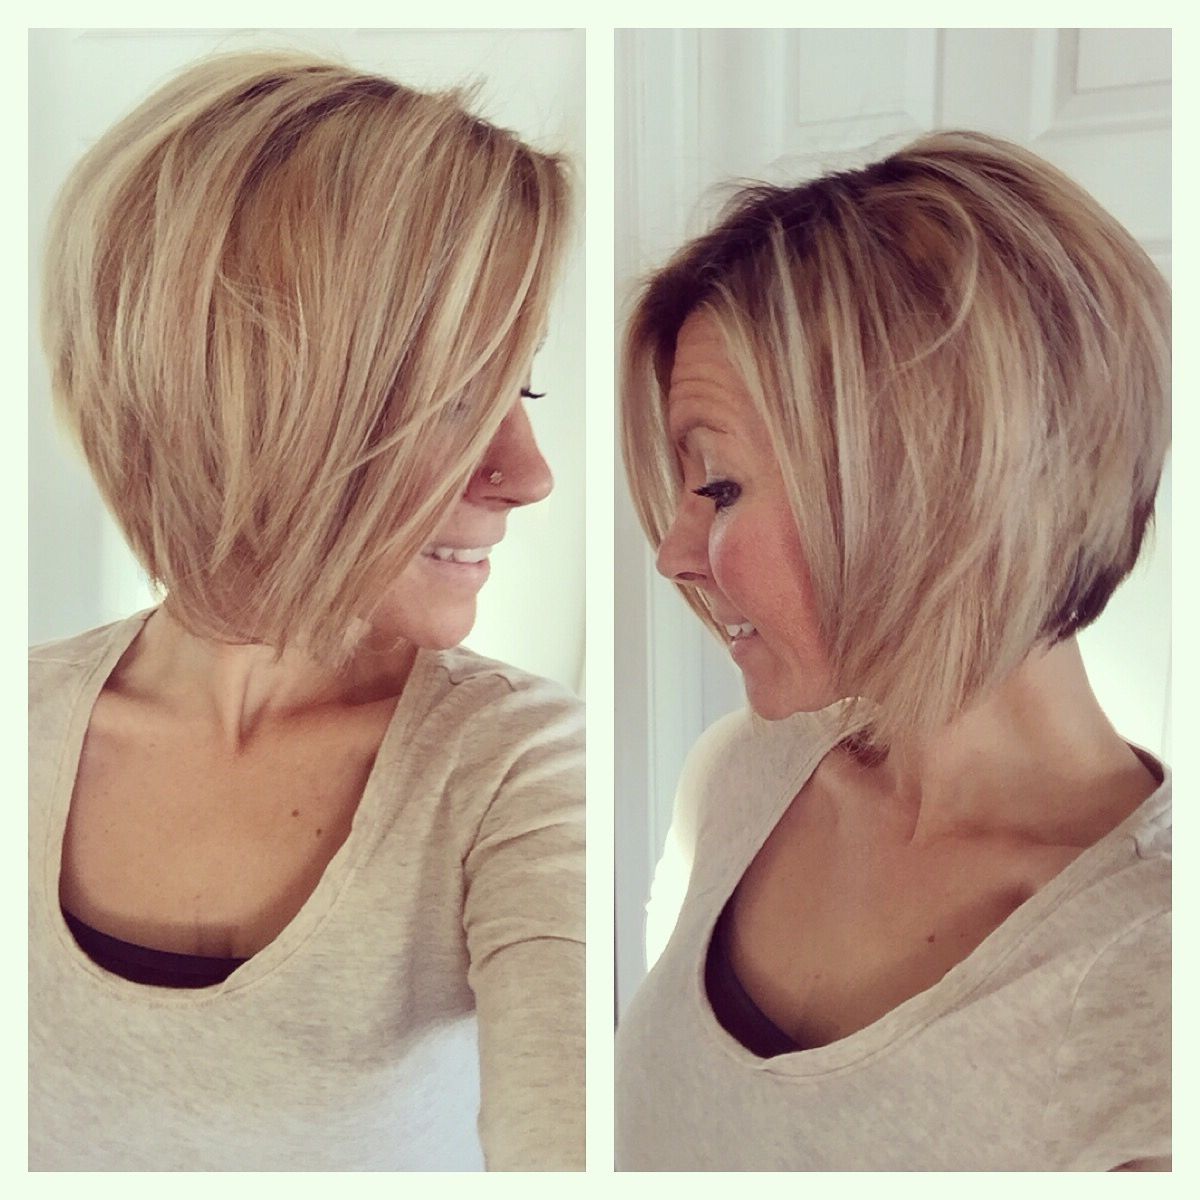 Widely Used Long Bob Blonde Hairstyles With Lowlights Regarding Blonde Angled Bob Hairstyles 84 With Blonde Angled Bob Hairstyles (View 15 of 20)